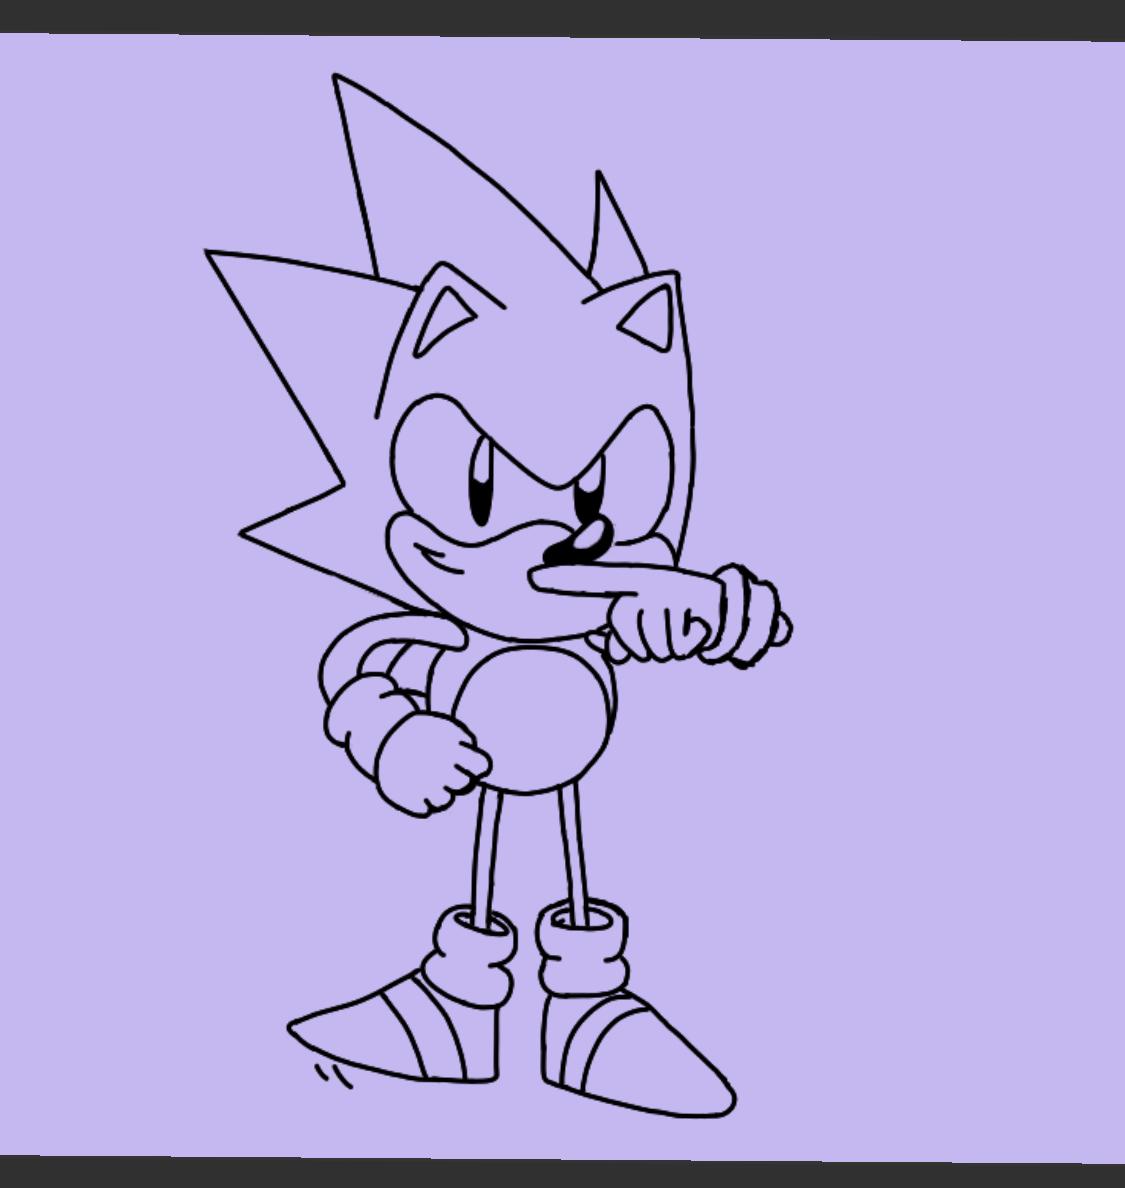 Working on a drawing and sonics head looks weird any ideas on how i can make it look right rsonicthehedgehog